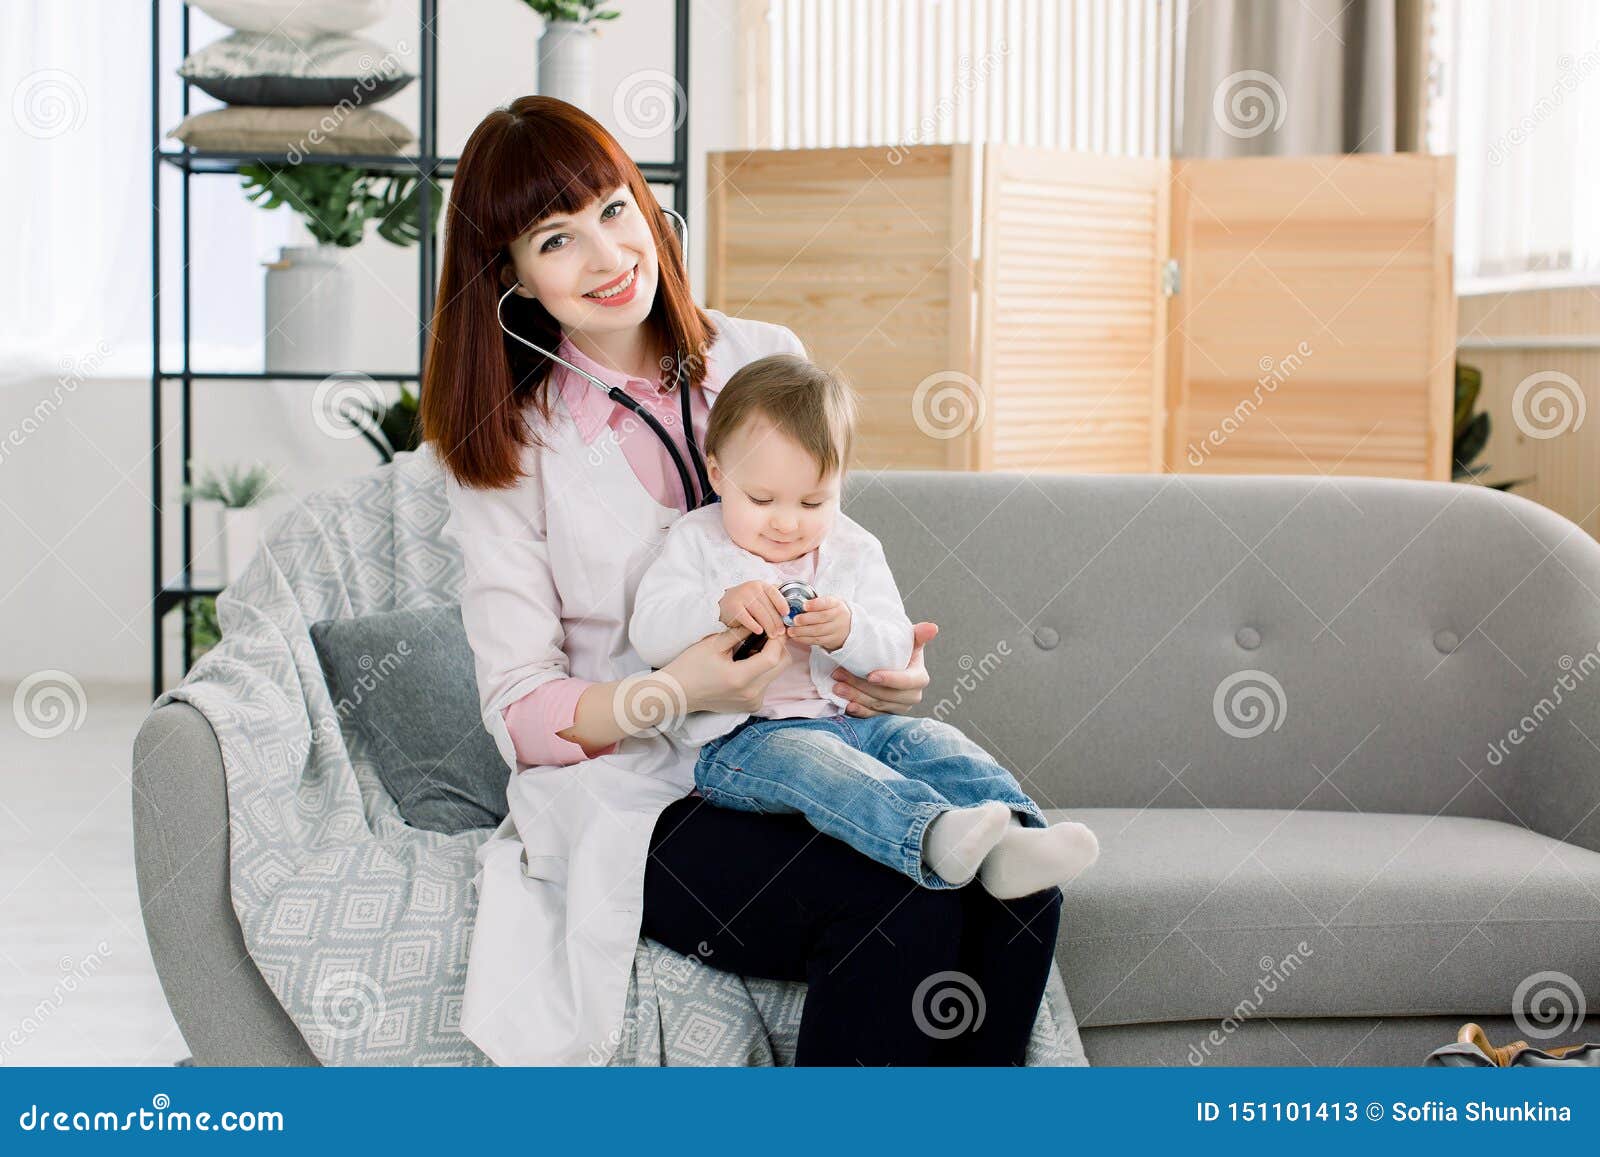 Doctor Have A Medical Examination Girl Stock Photo 